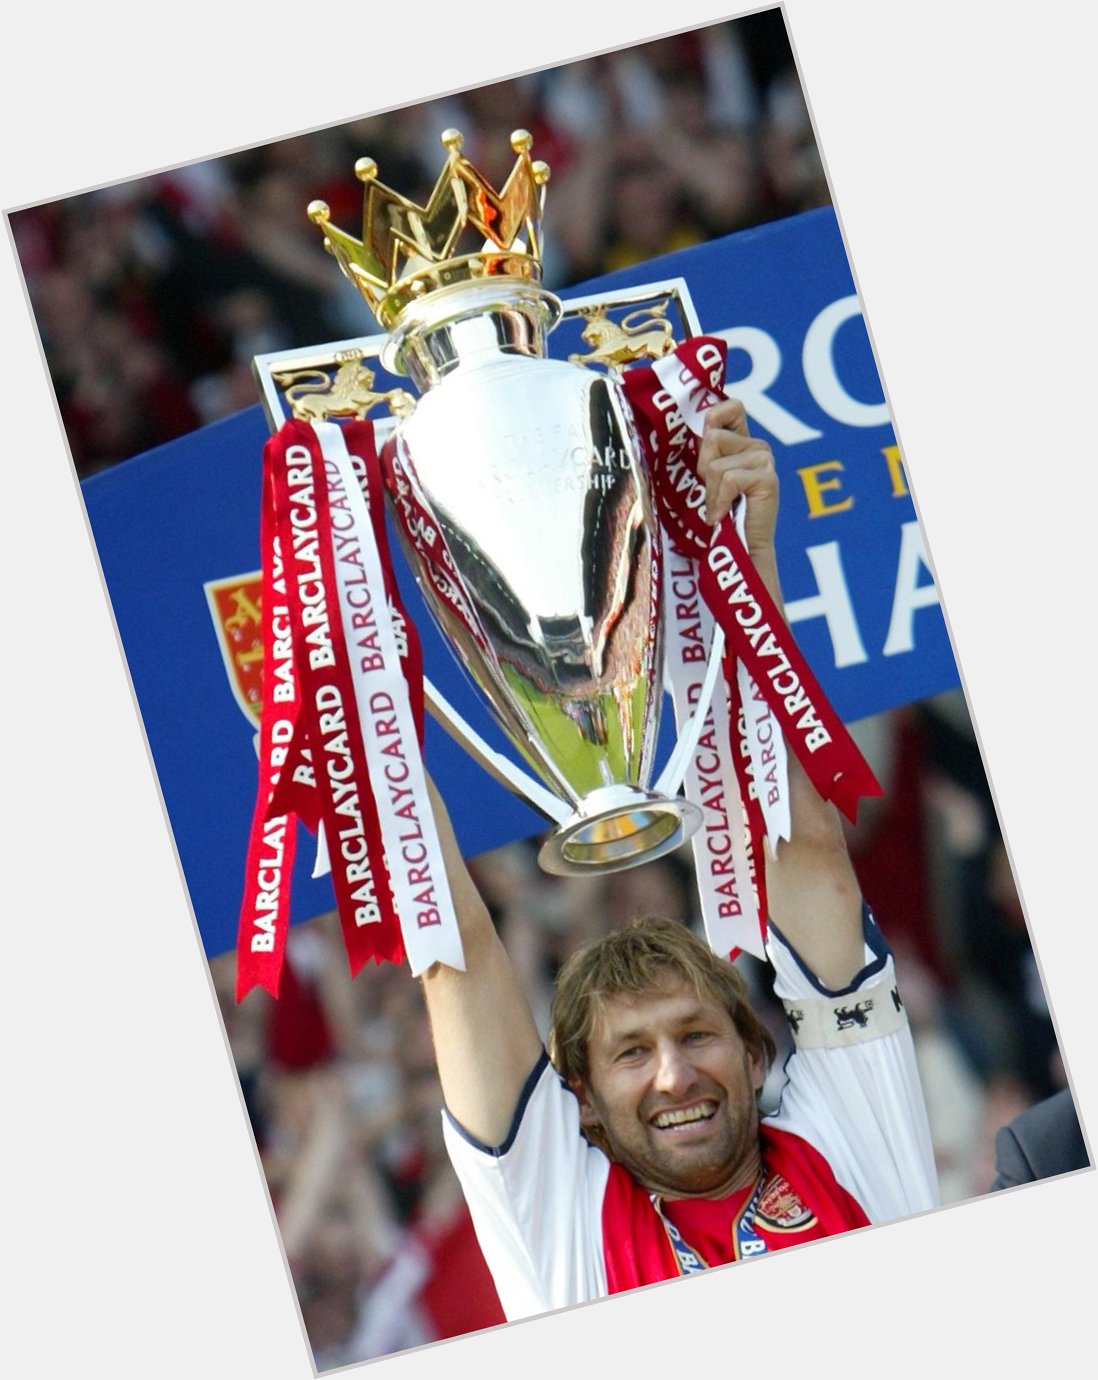 Happy 49th birthday to Arsenal icon Tony Adams, winner of the English domestic double on 2 occasions. One-club man. 